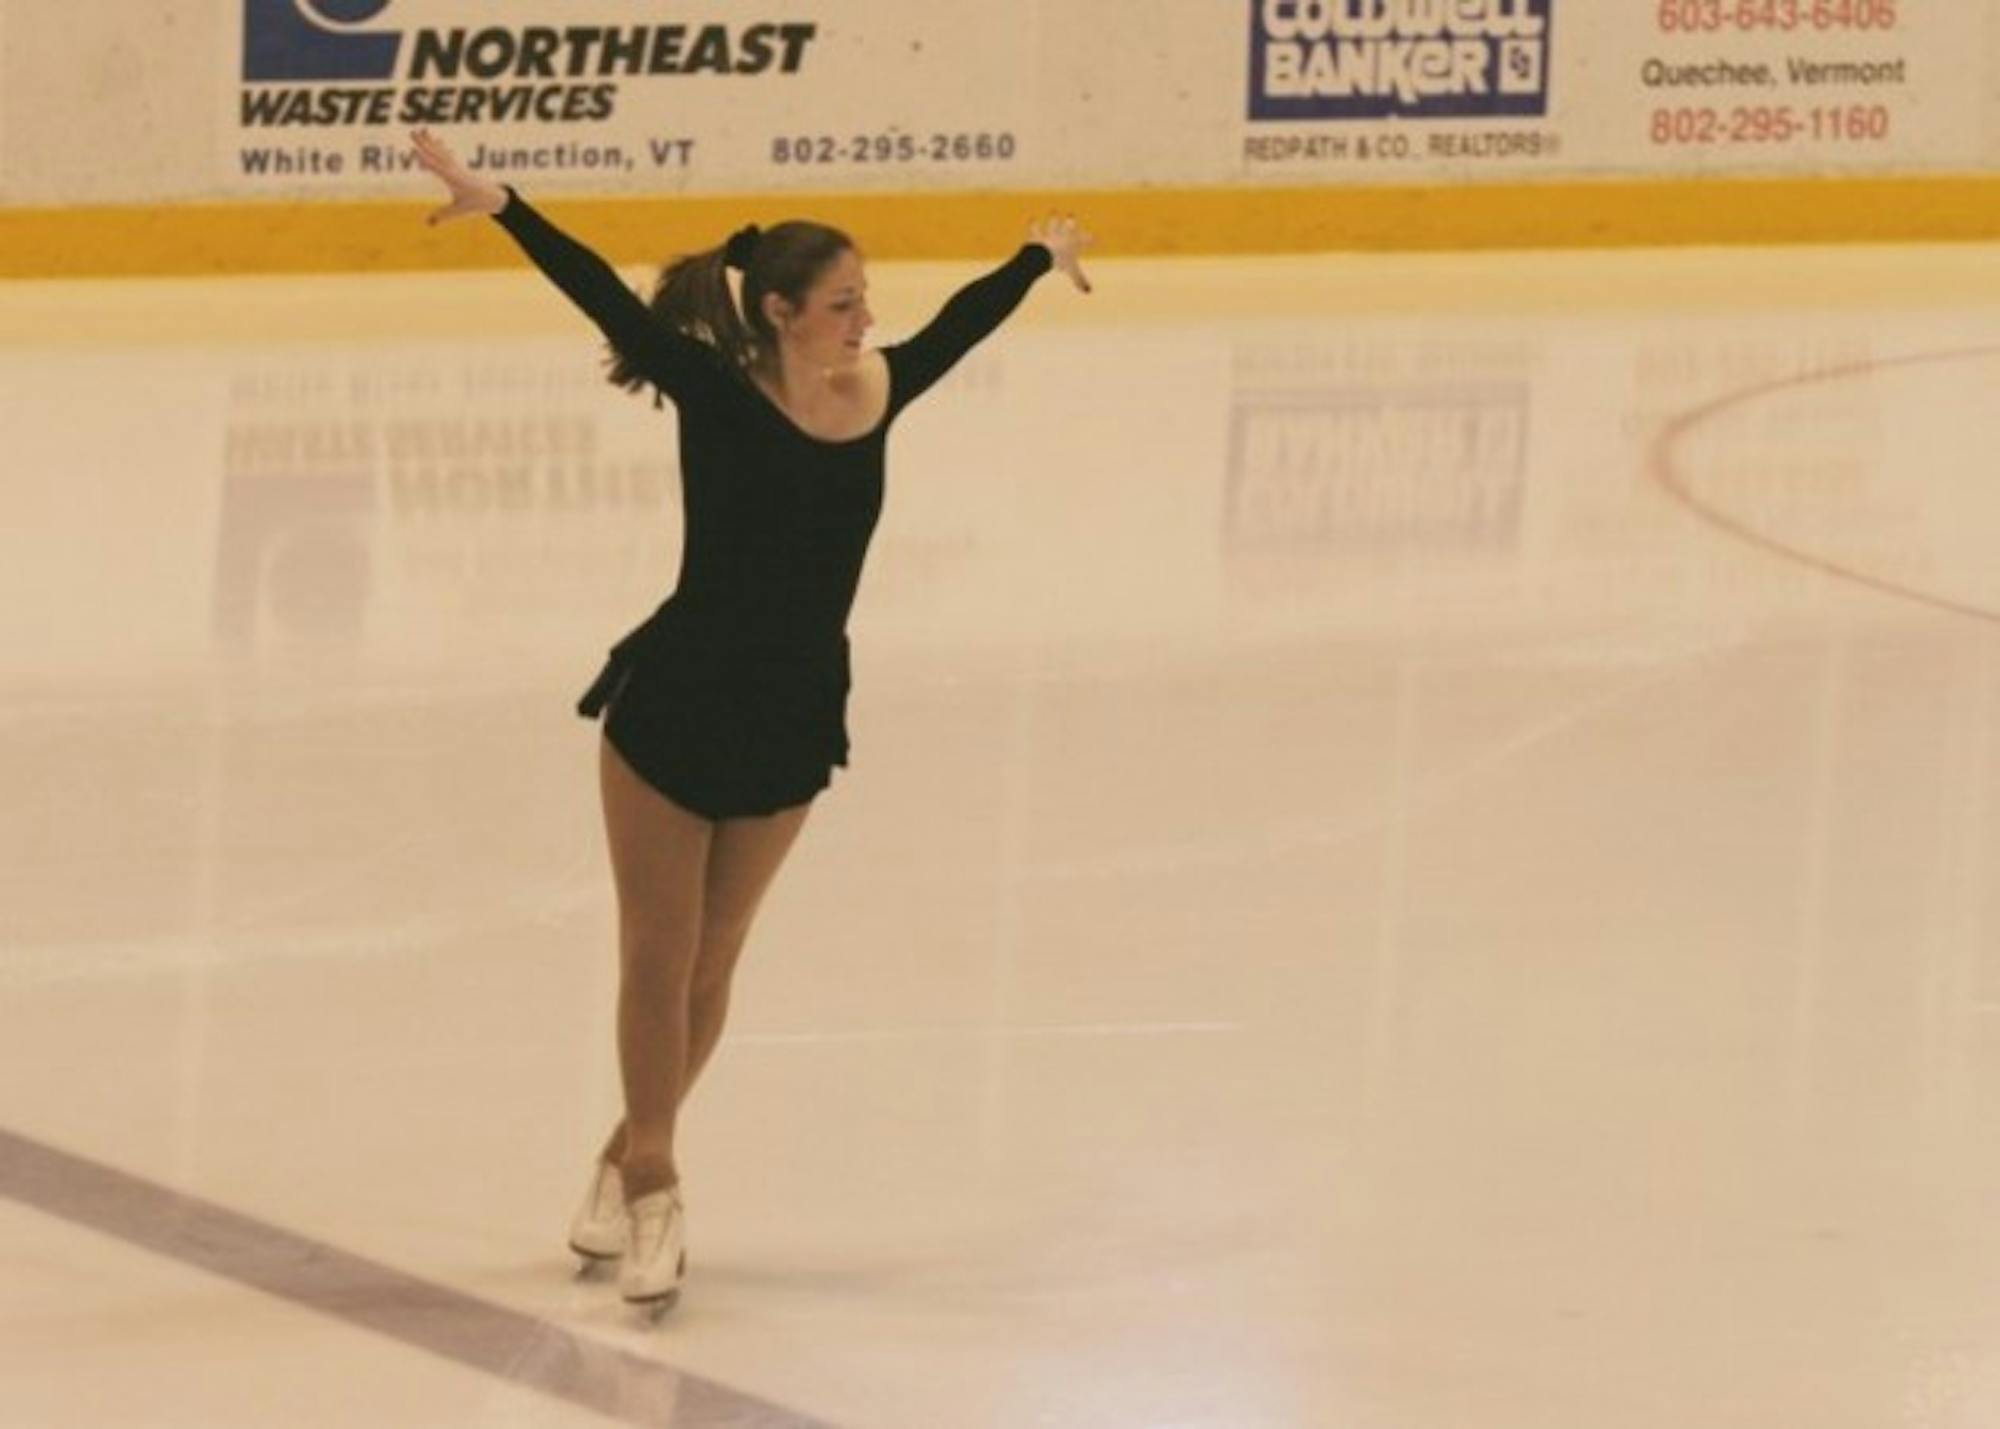 The figure skating team will have a chance to capture a fourth consecutive national title later this year.